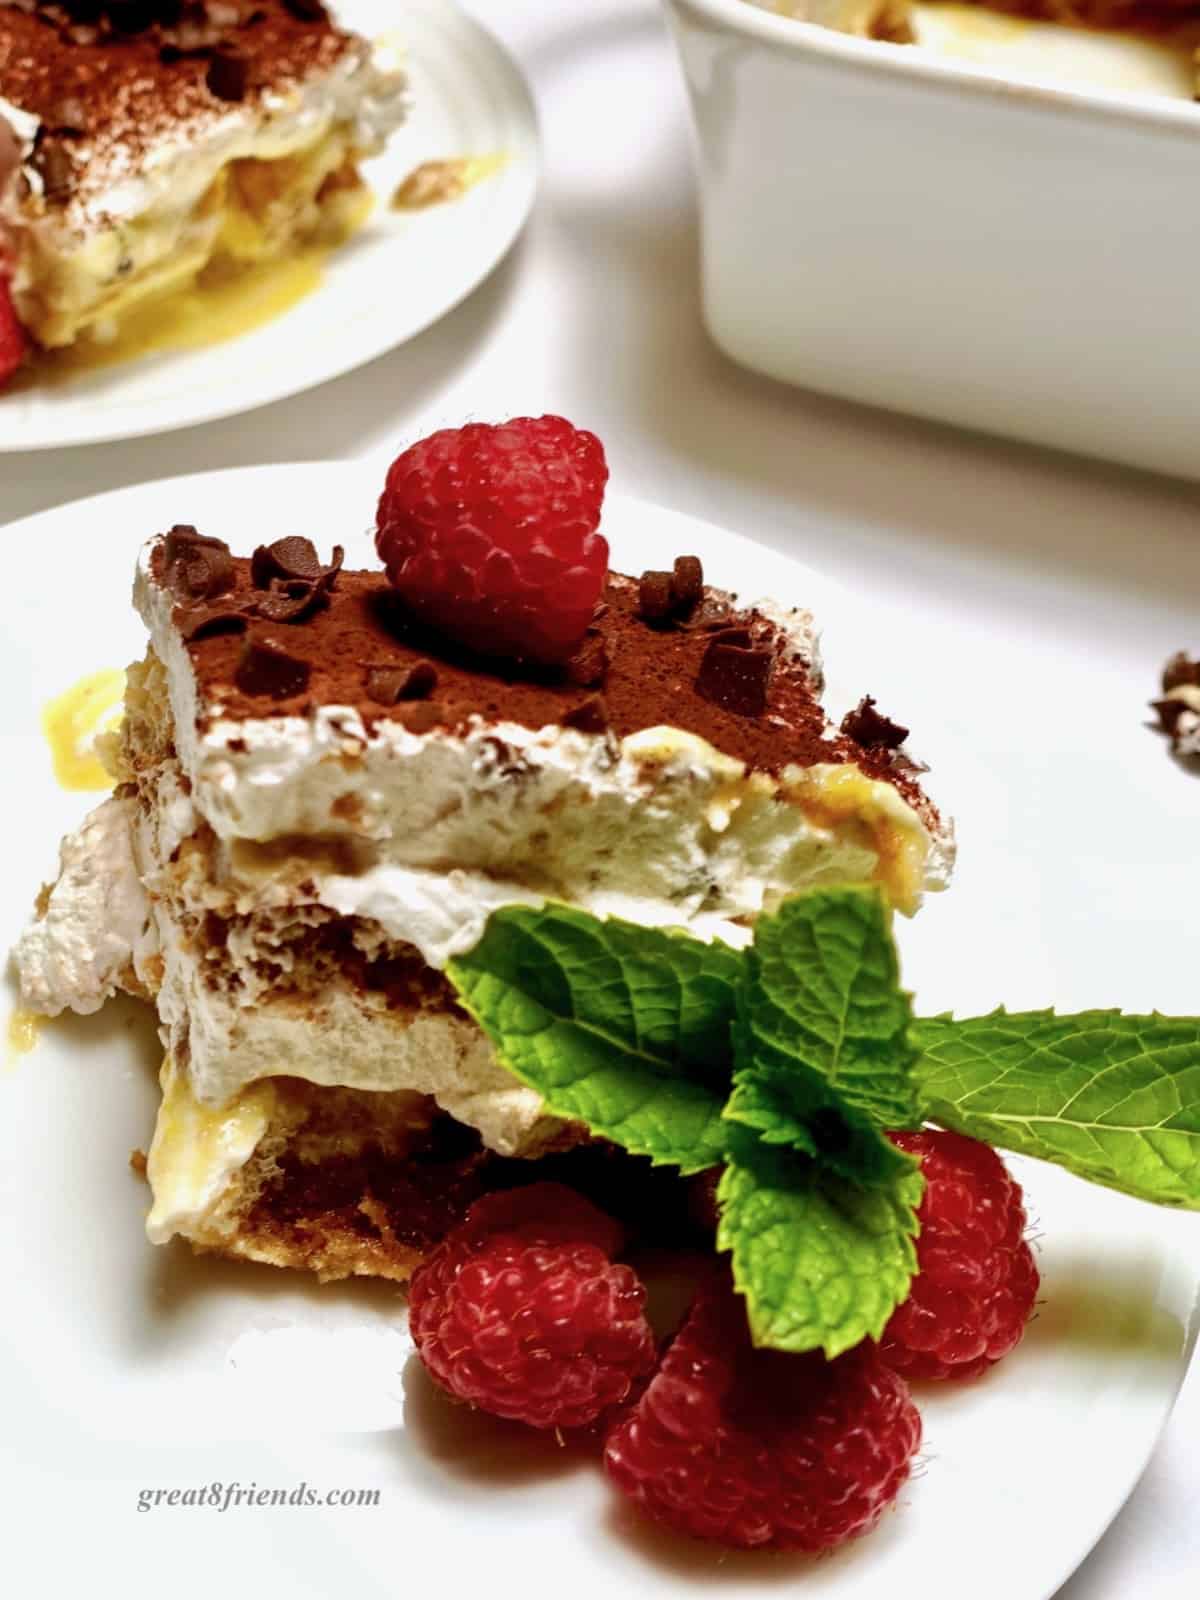 A piece of tiramisu on a plate garnished with raspberries and mint sprigs.